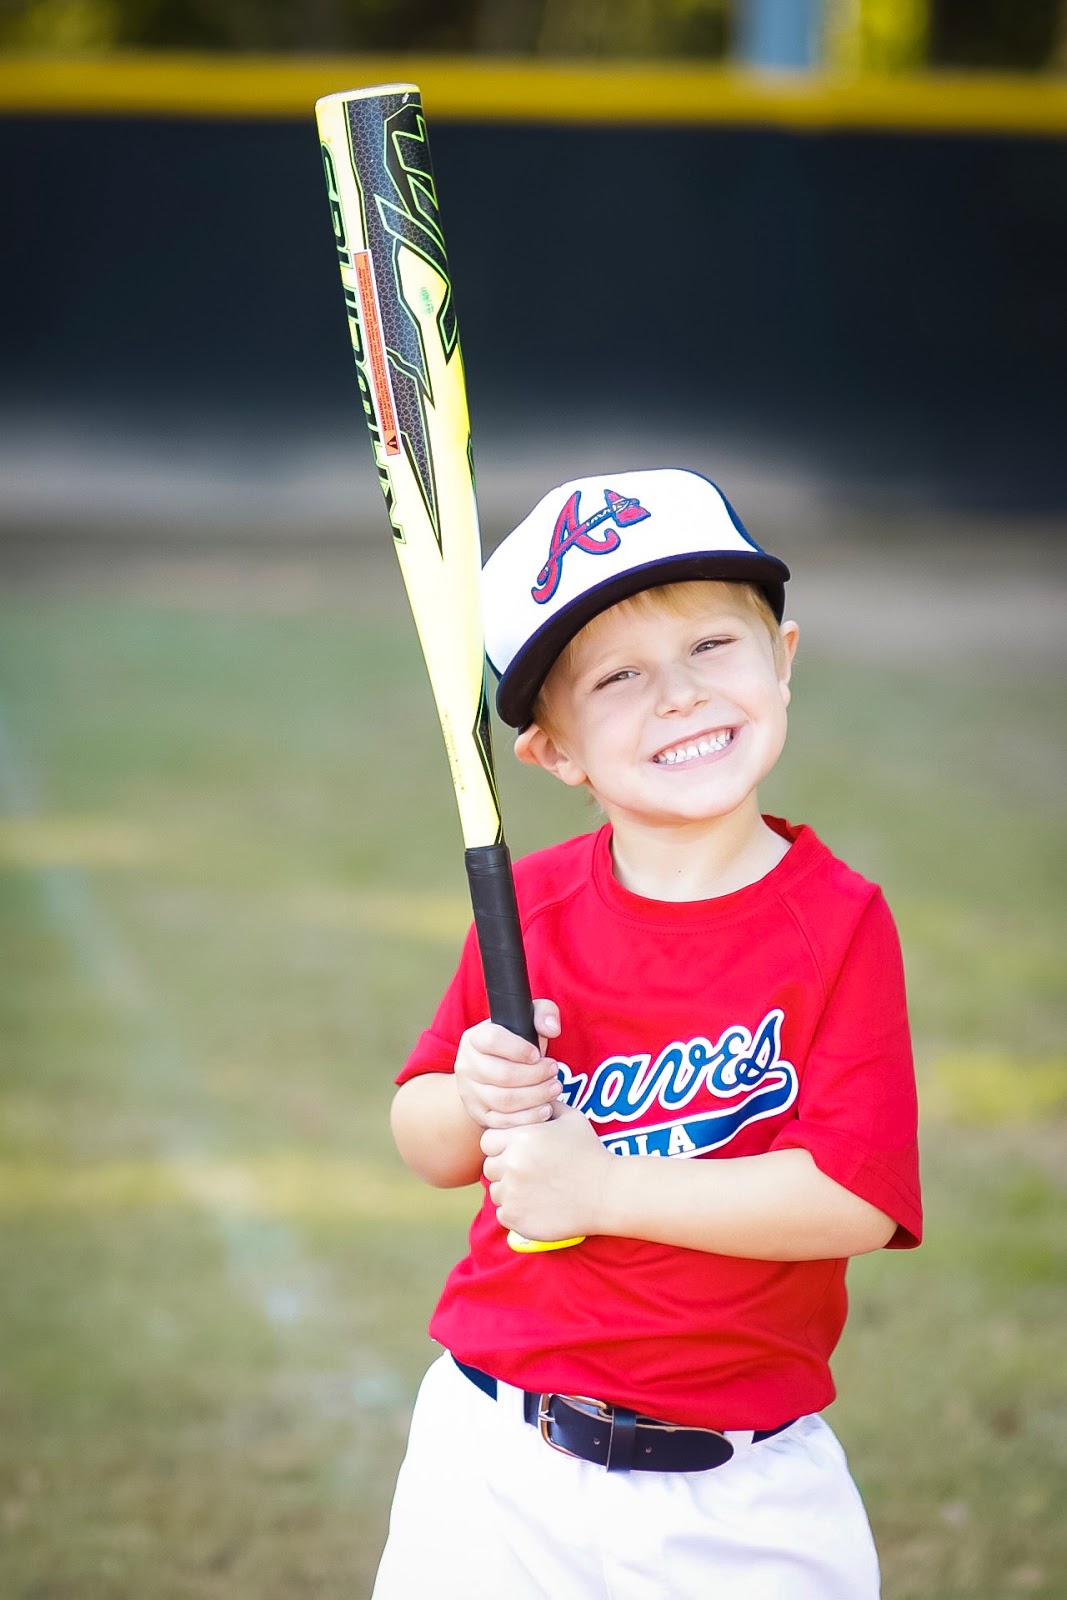 10 Reasons Why Team Sports are Essential for Kids - Nanny to Mommy